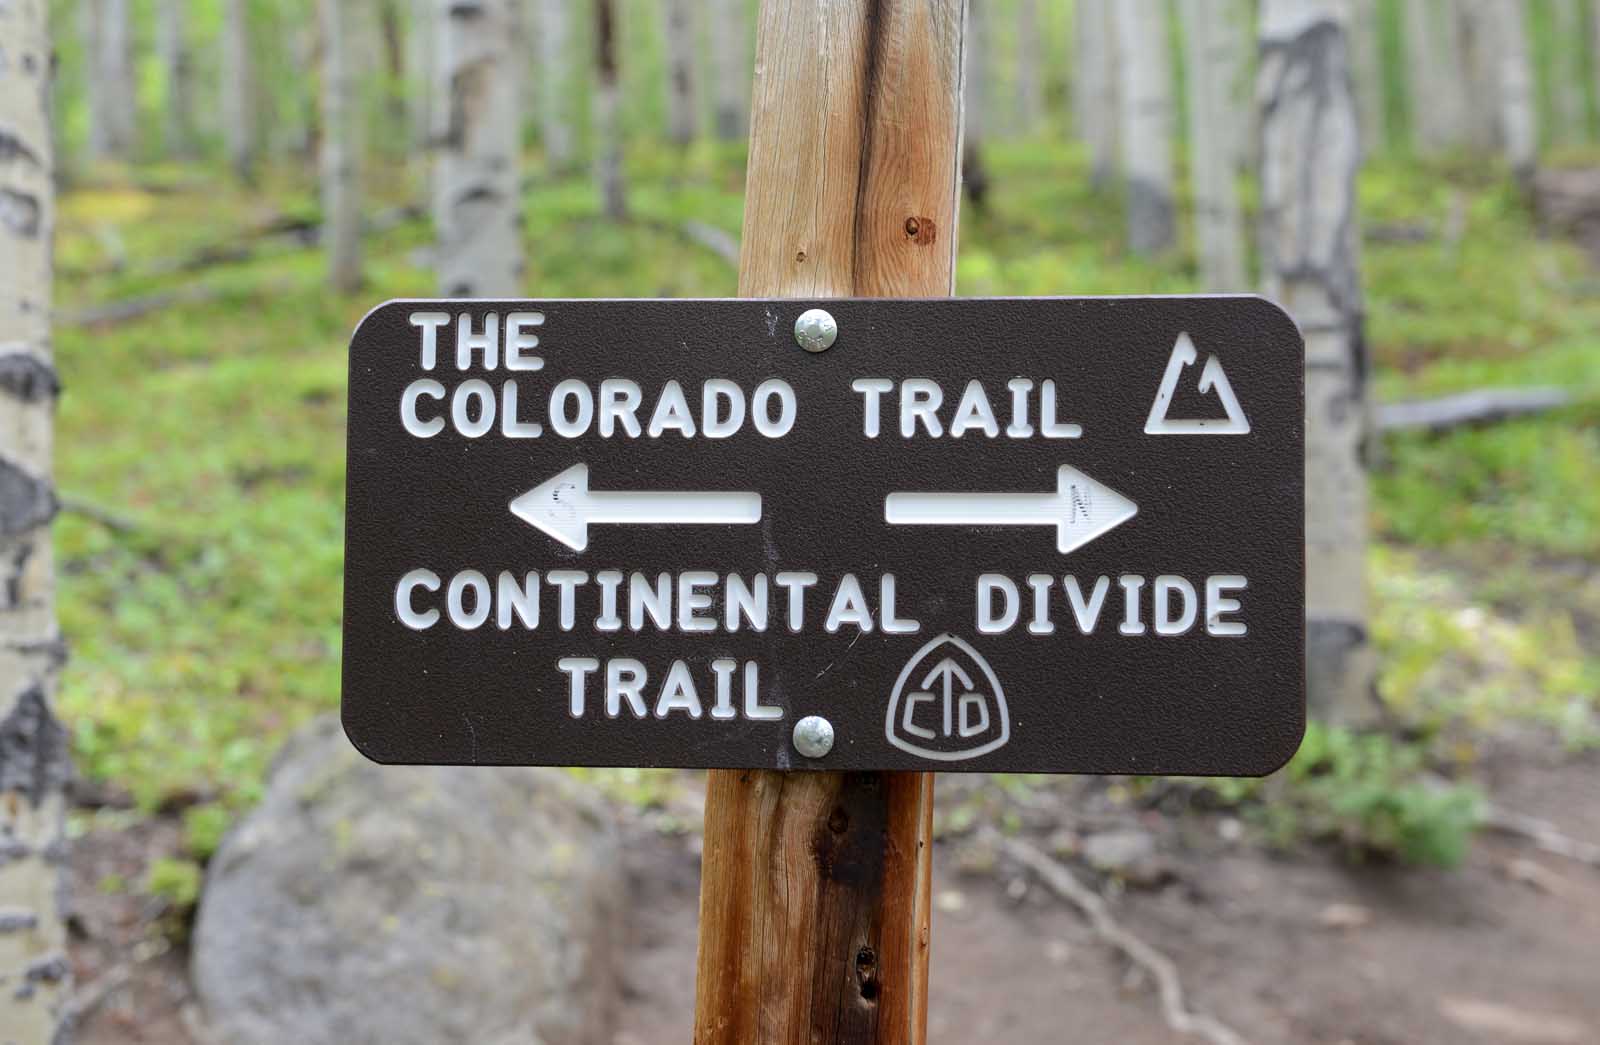 Best Hikes in Colorado The Colorado Trail